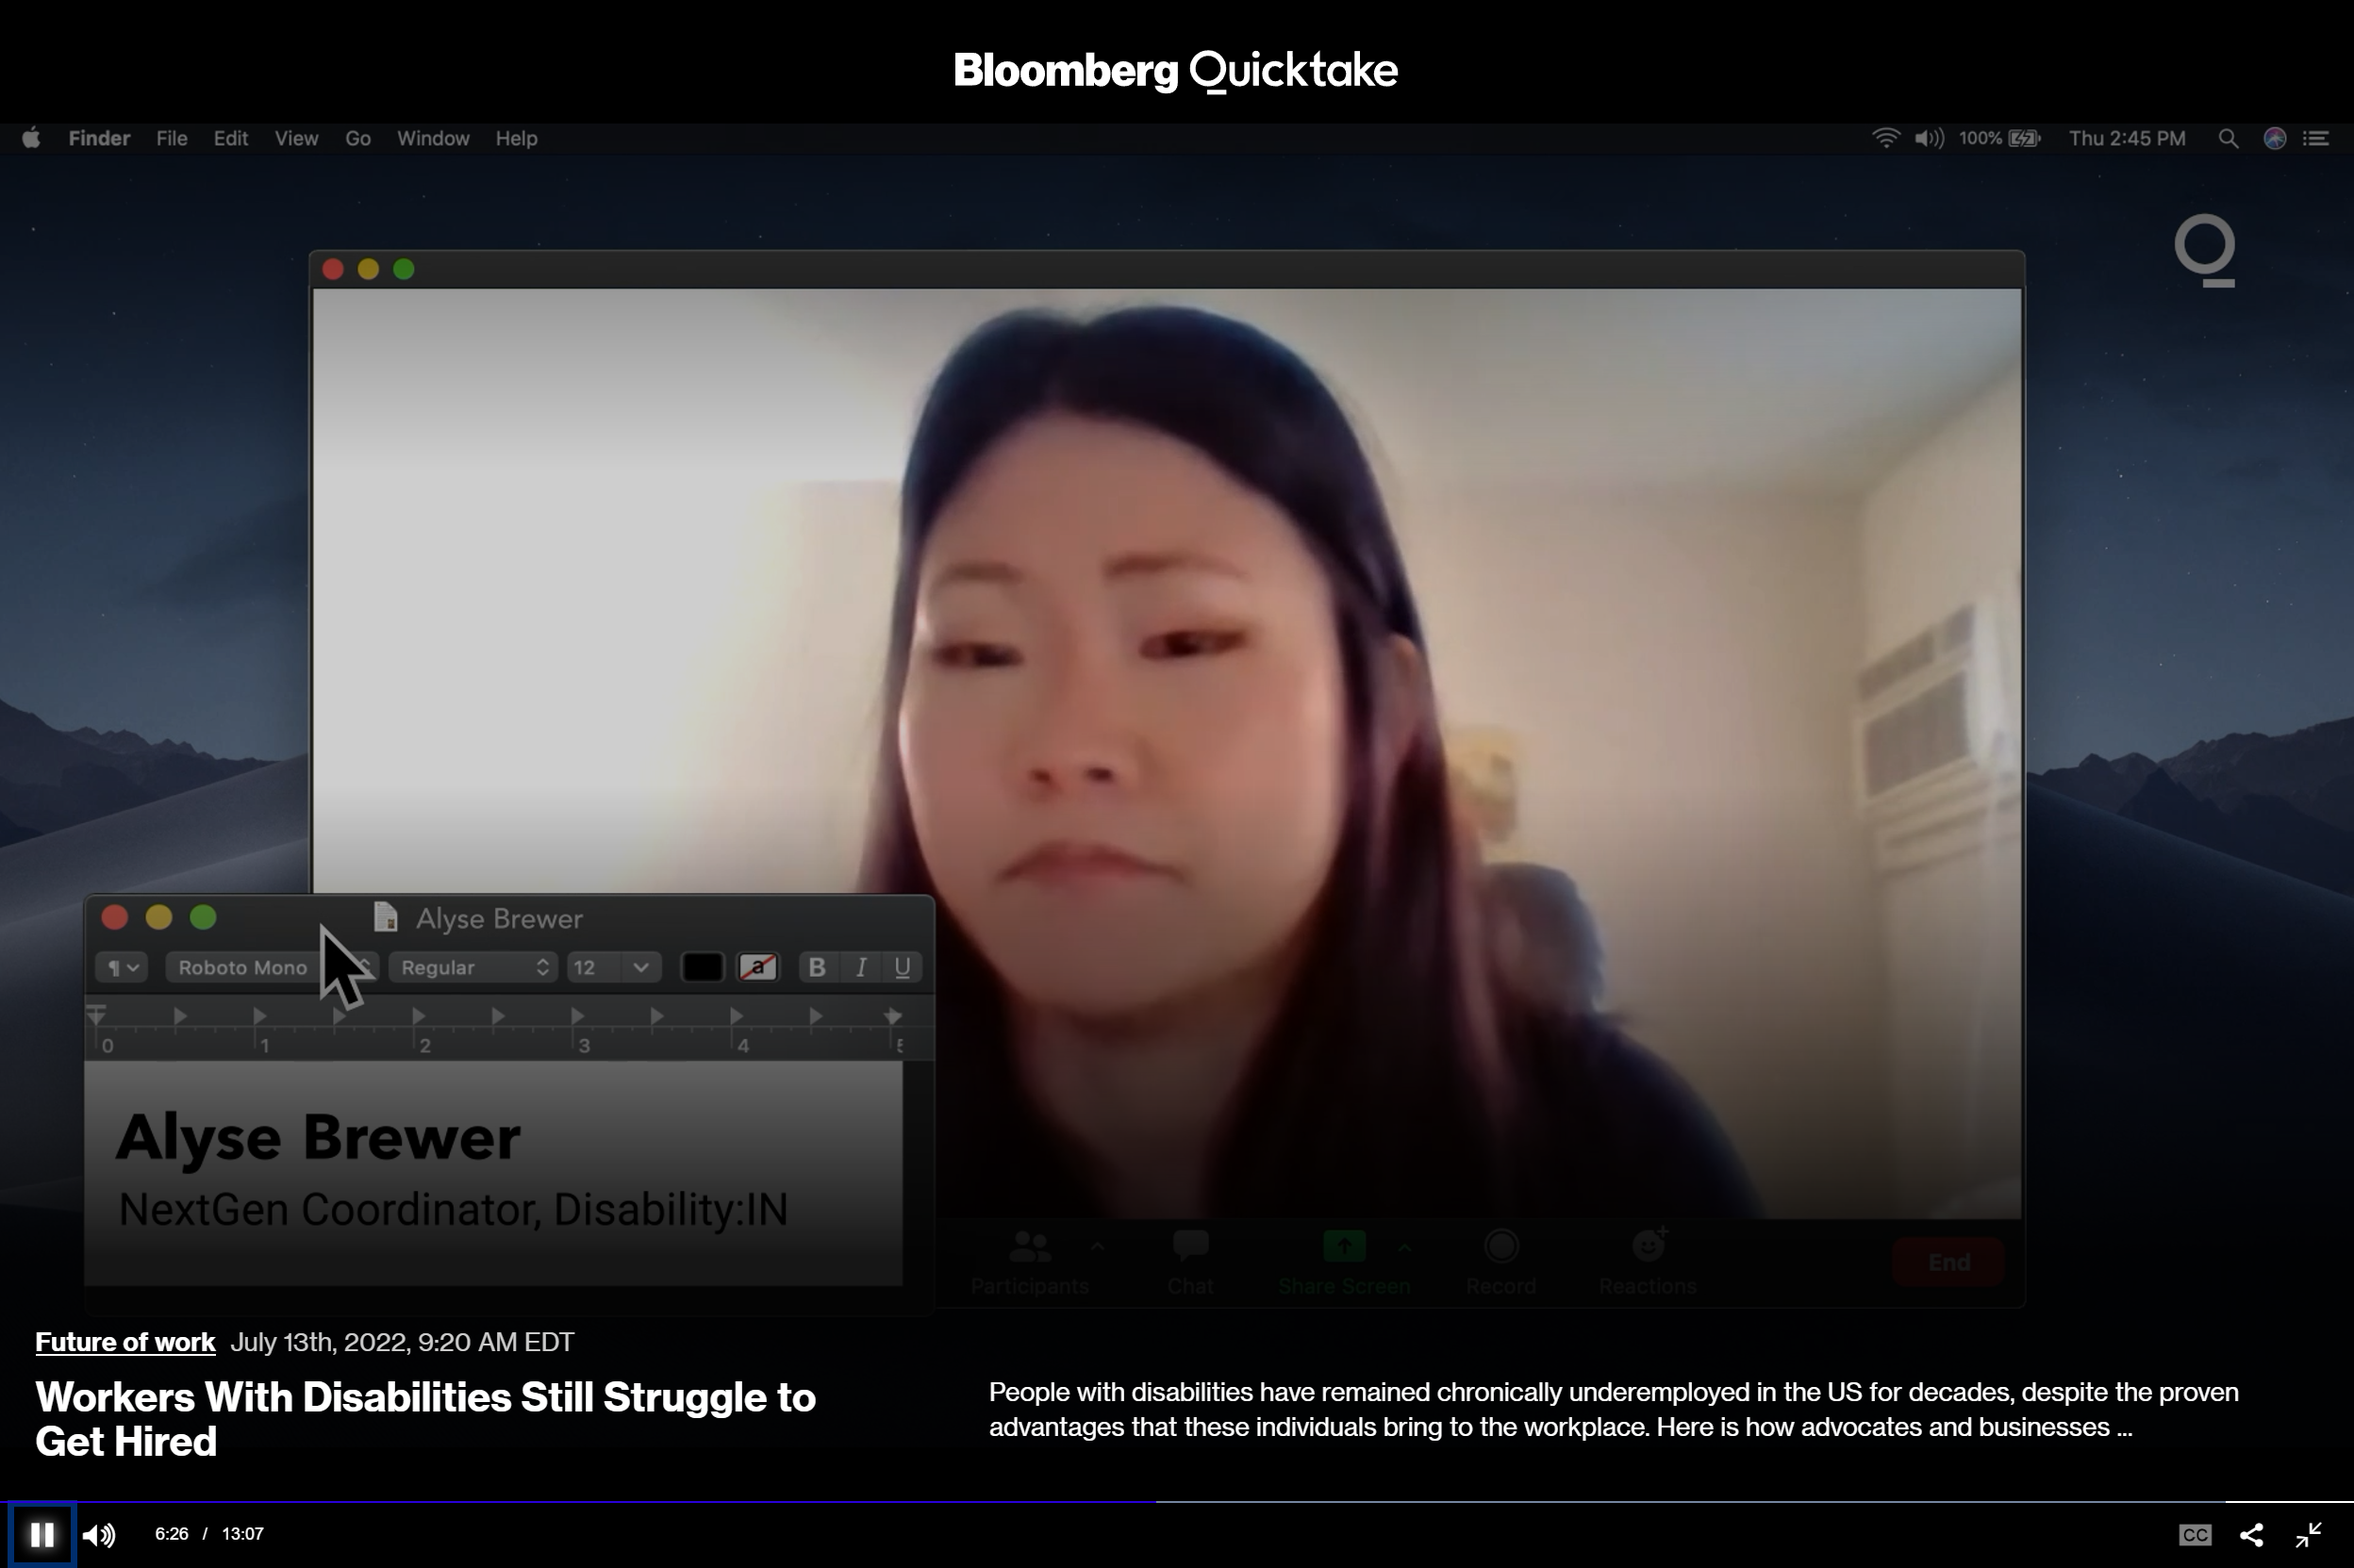 Screengrab of video from Bloomberg Quicktake featuring Alyse Brewer, Disability:IN NextGen Coordinator